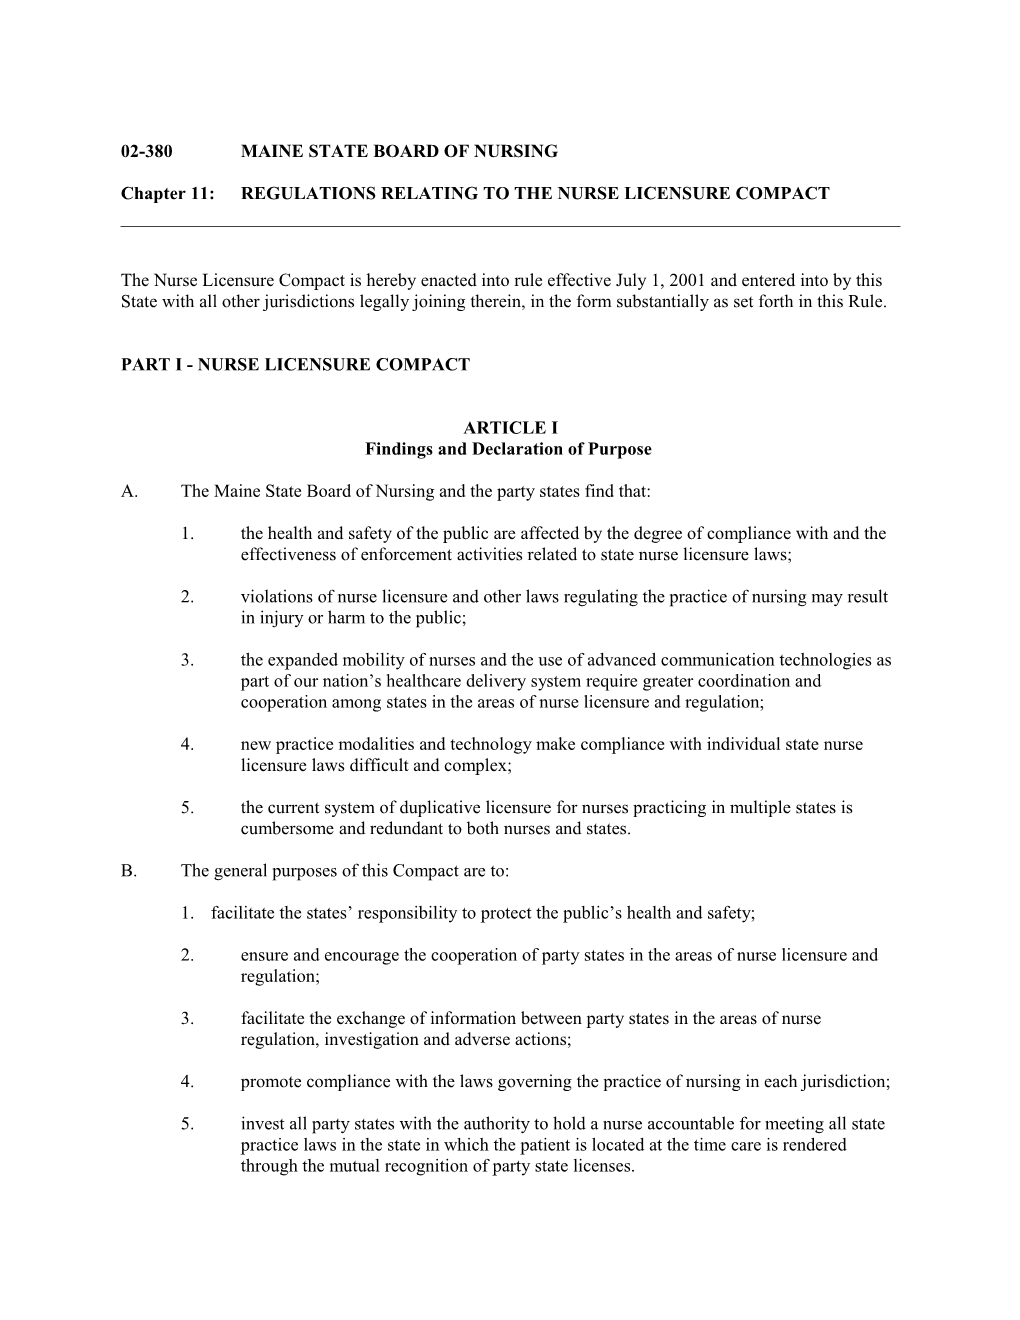 Chapter 11 REGULATIONS RELATING to the NURSE LICENSURE COMPACT